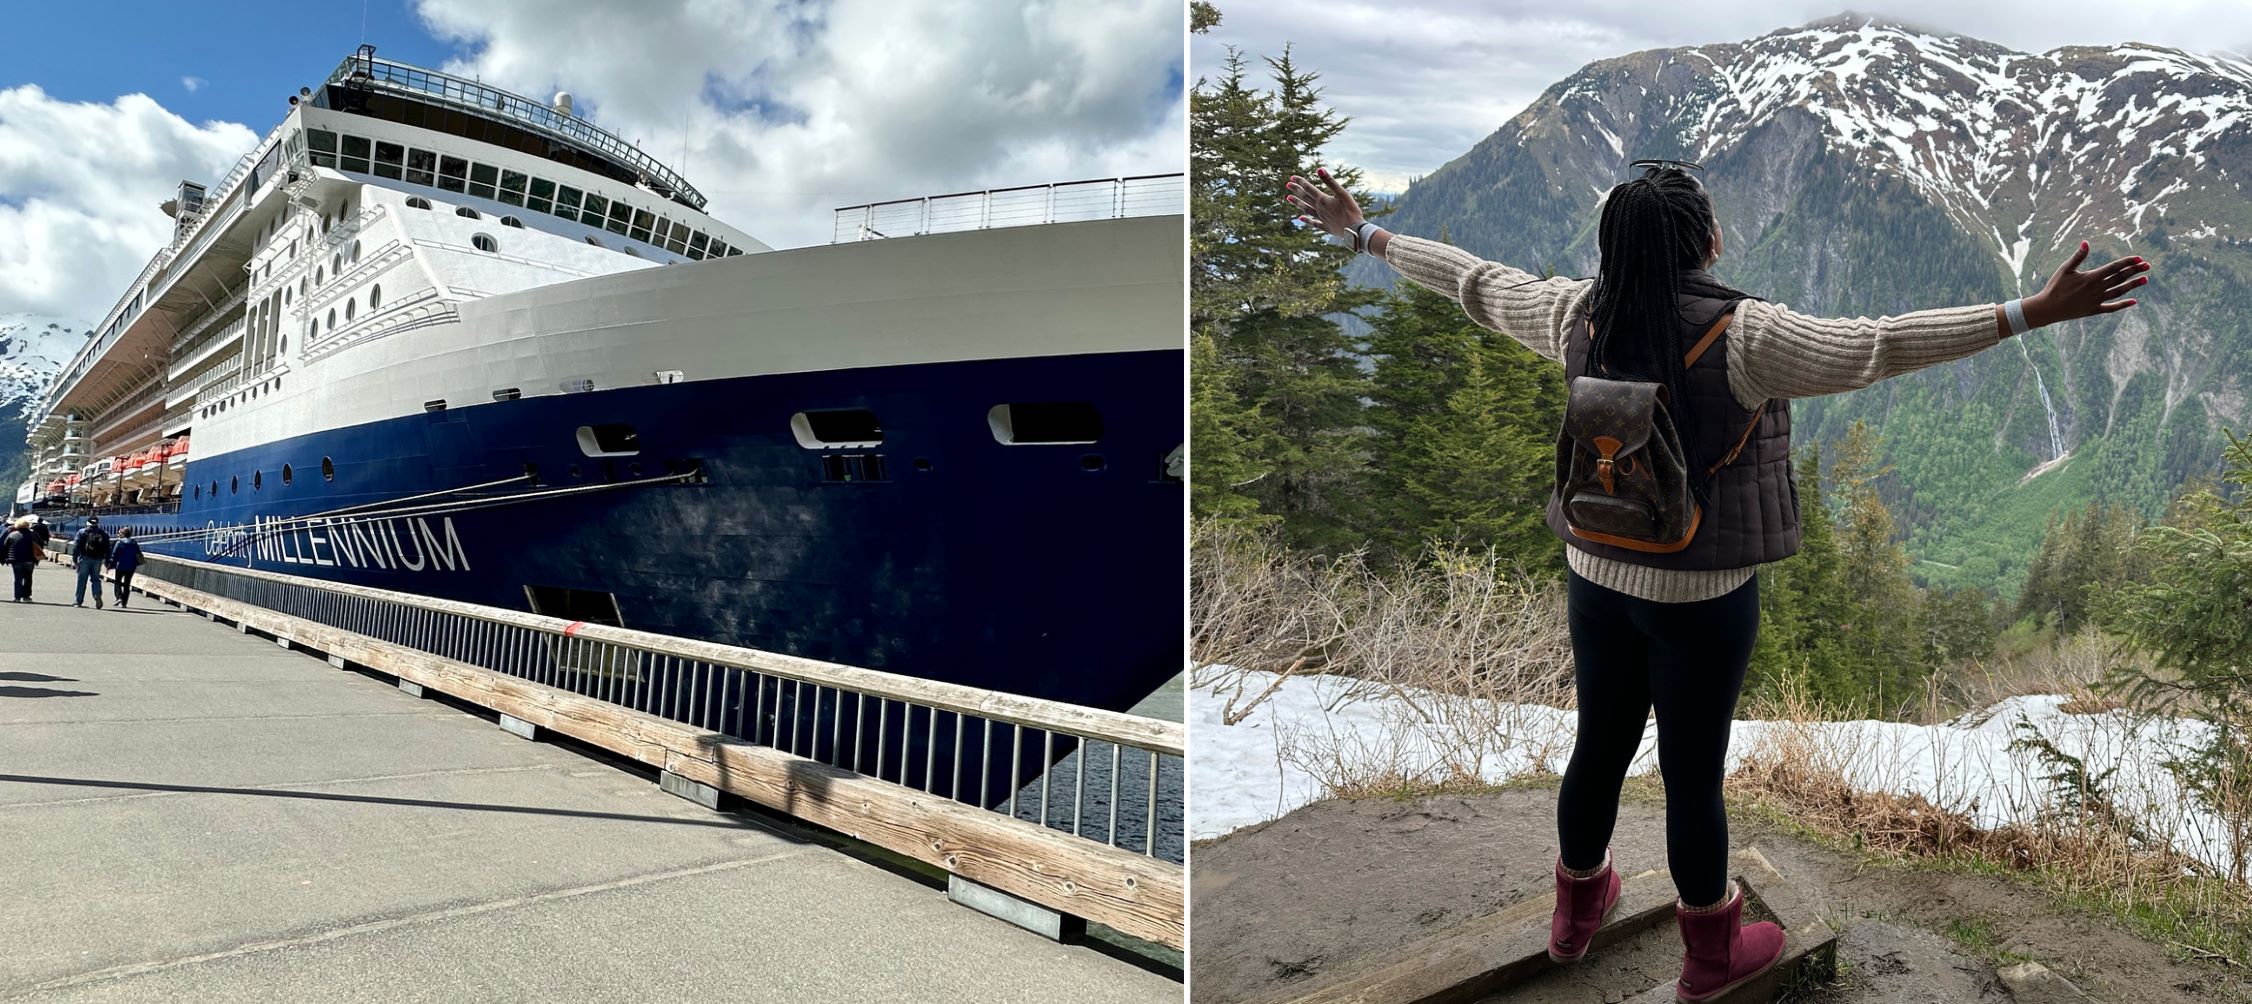 Embark On an Alaska Cruise with Celebrity Cruises, and Set Sail On the Adventure of a Lifetime